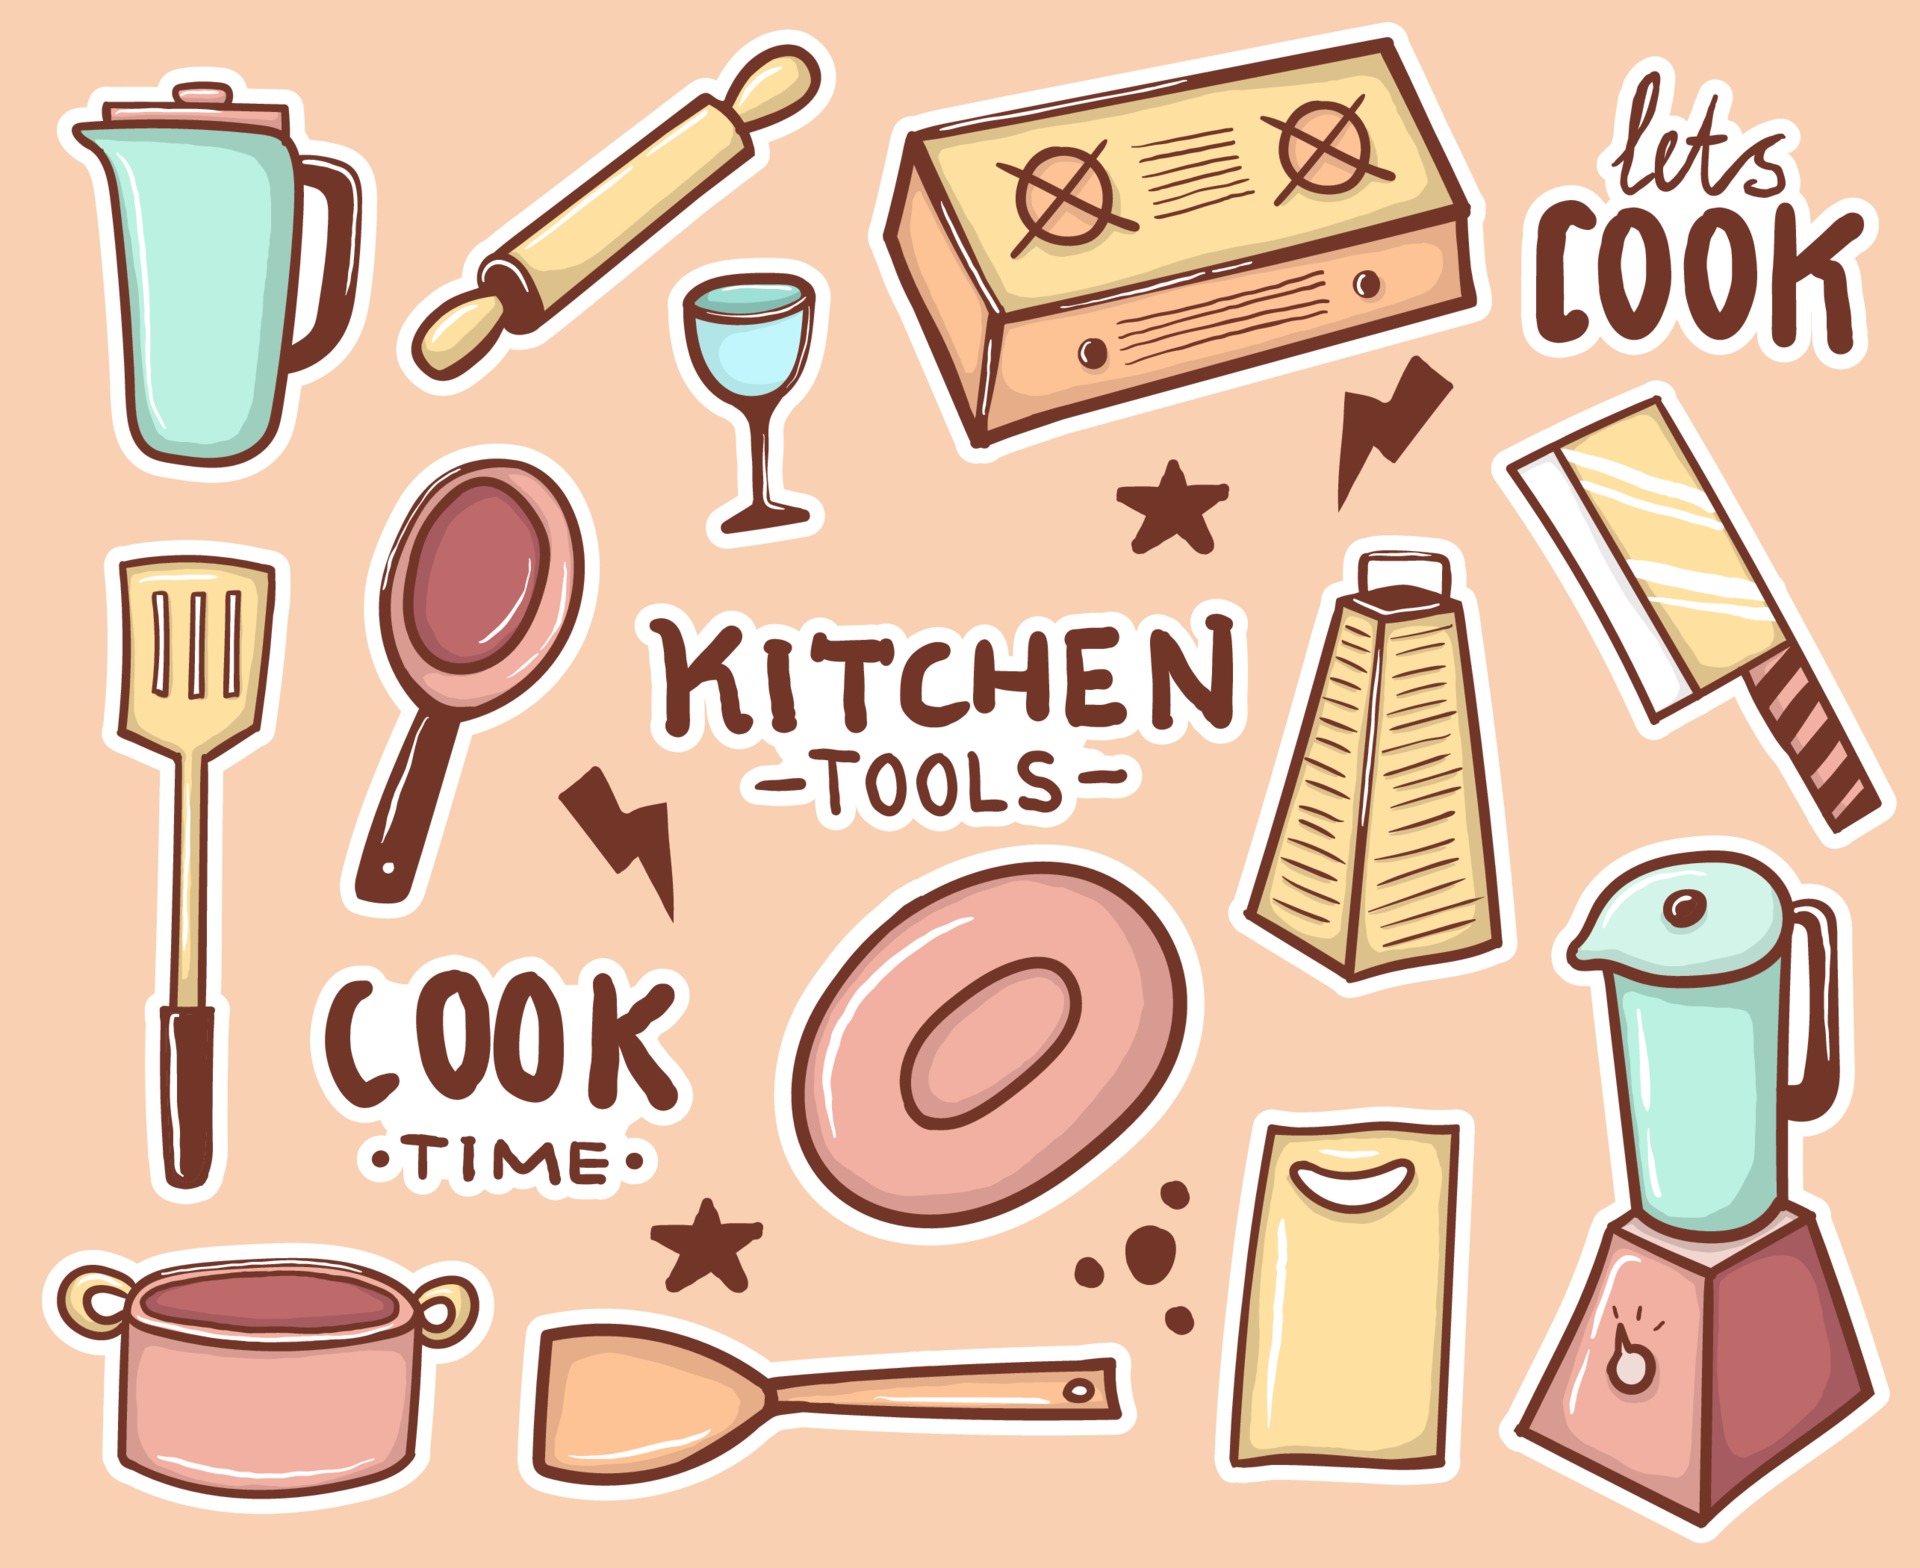 https://static.vecteezy.com/system/resources/previews/002/024/676/original/colorful-hand-drawn-kitchen-tools-stickers-collection-vector.jpg